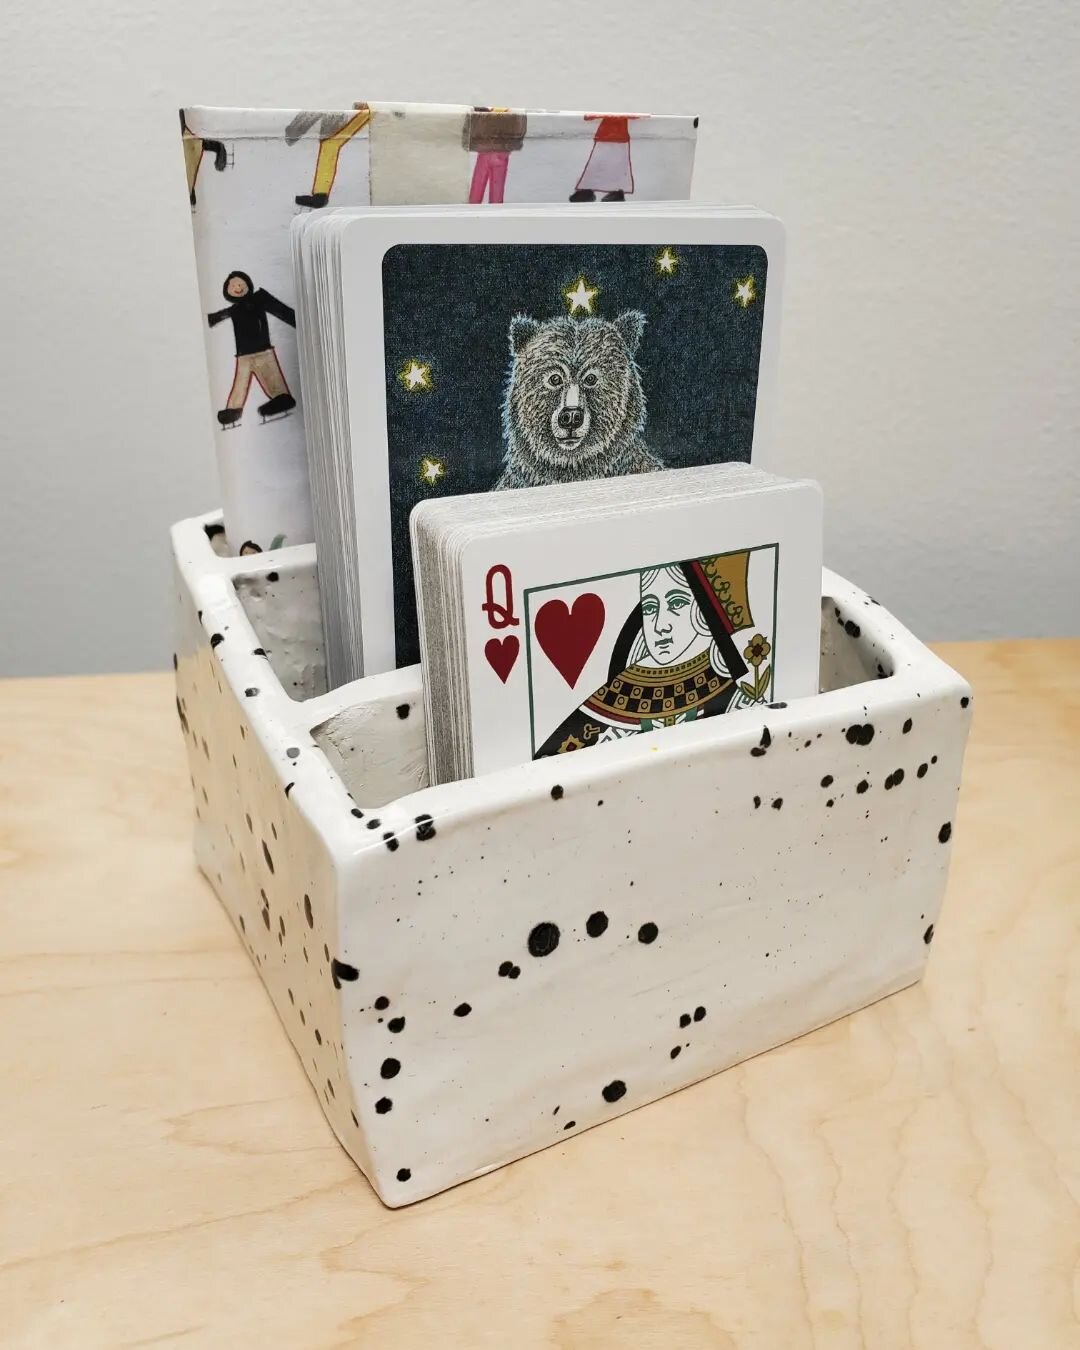 ⭐ Custom card holder I made in ceramics class! ✨ 

I wanted a place to store these precious items vertically, instead of having them lined up in stacks on my shelf. They tended to fall over and get strewn about.

Now there's a home for playing cards 